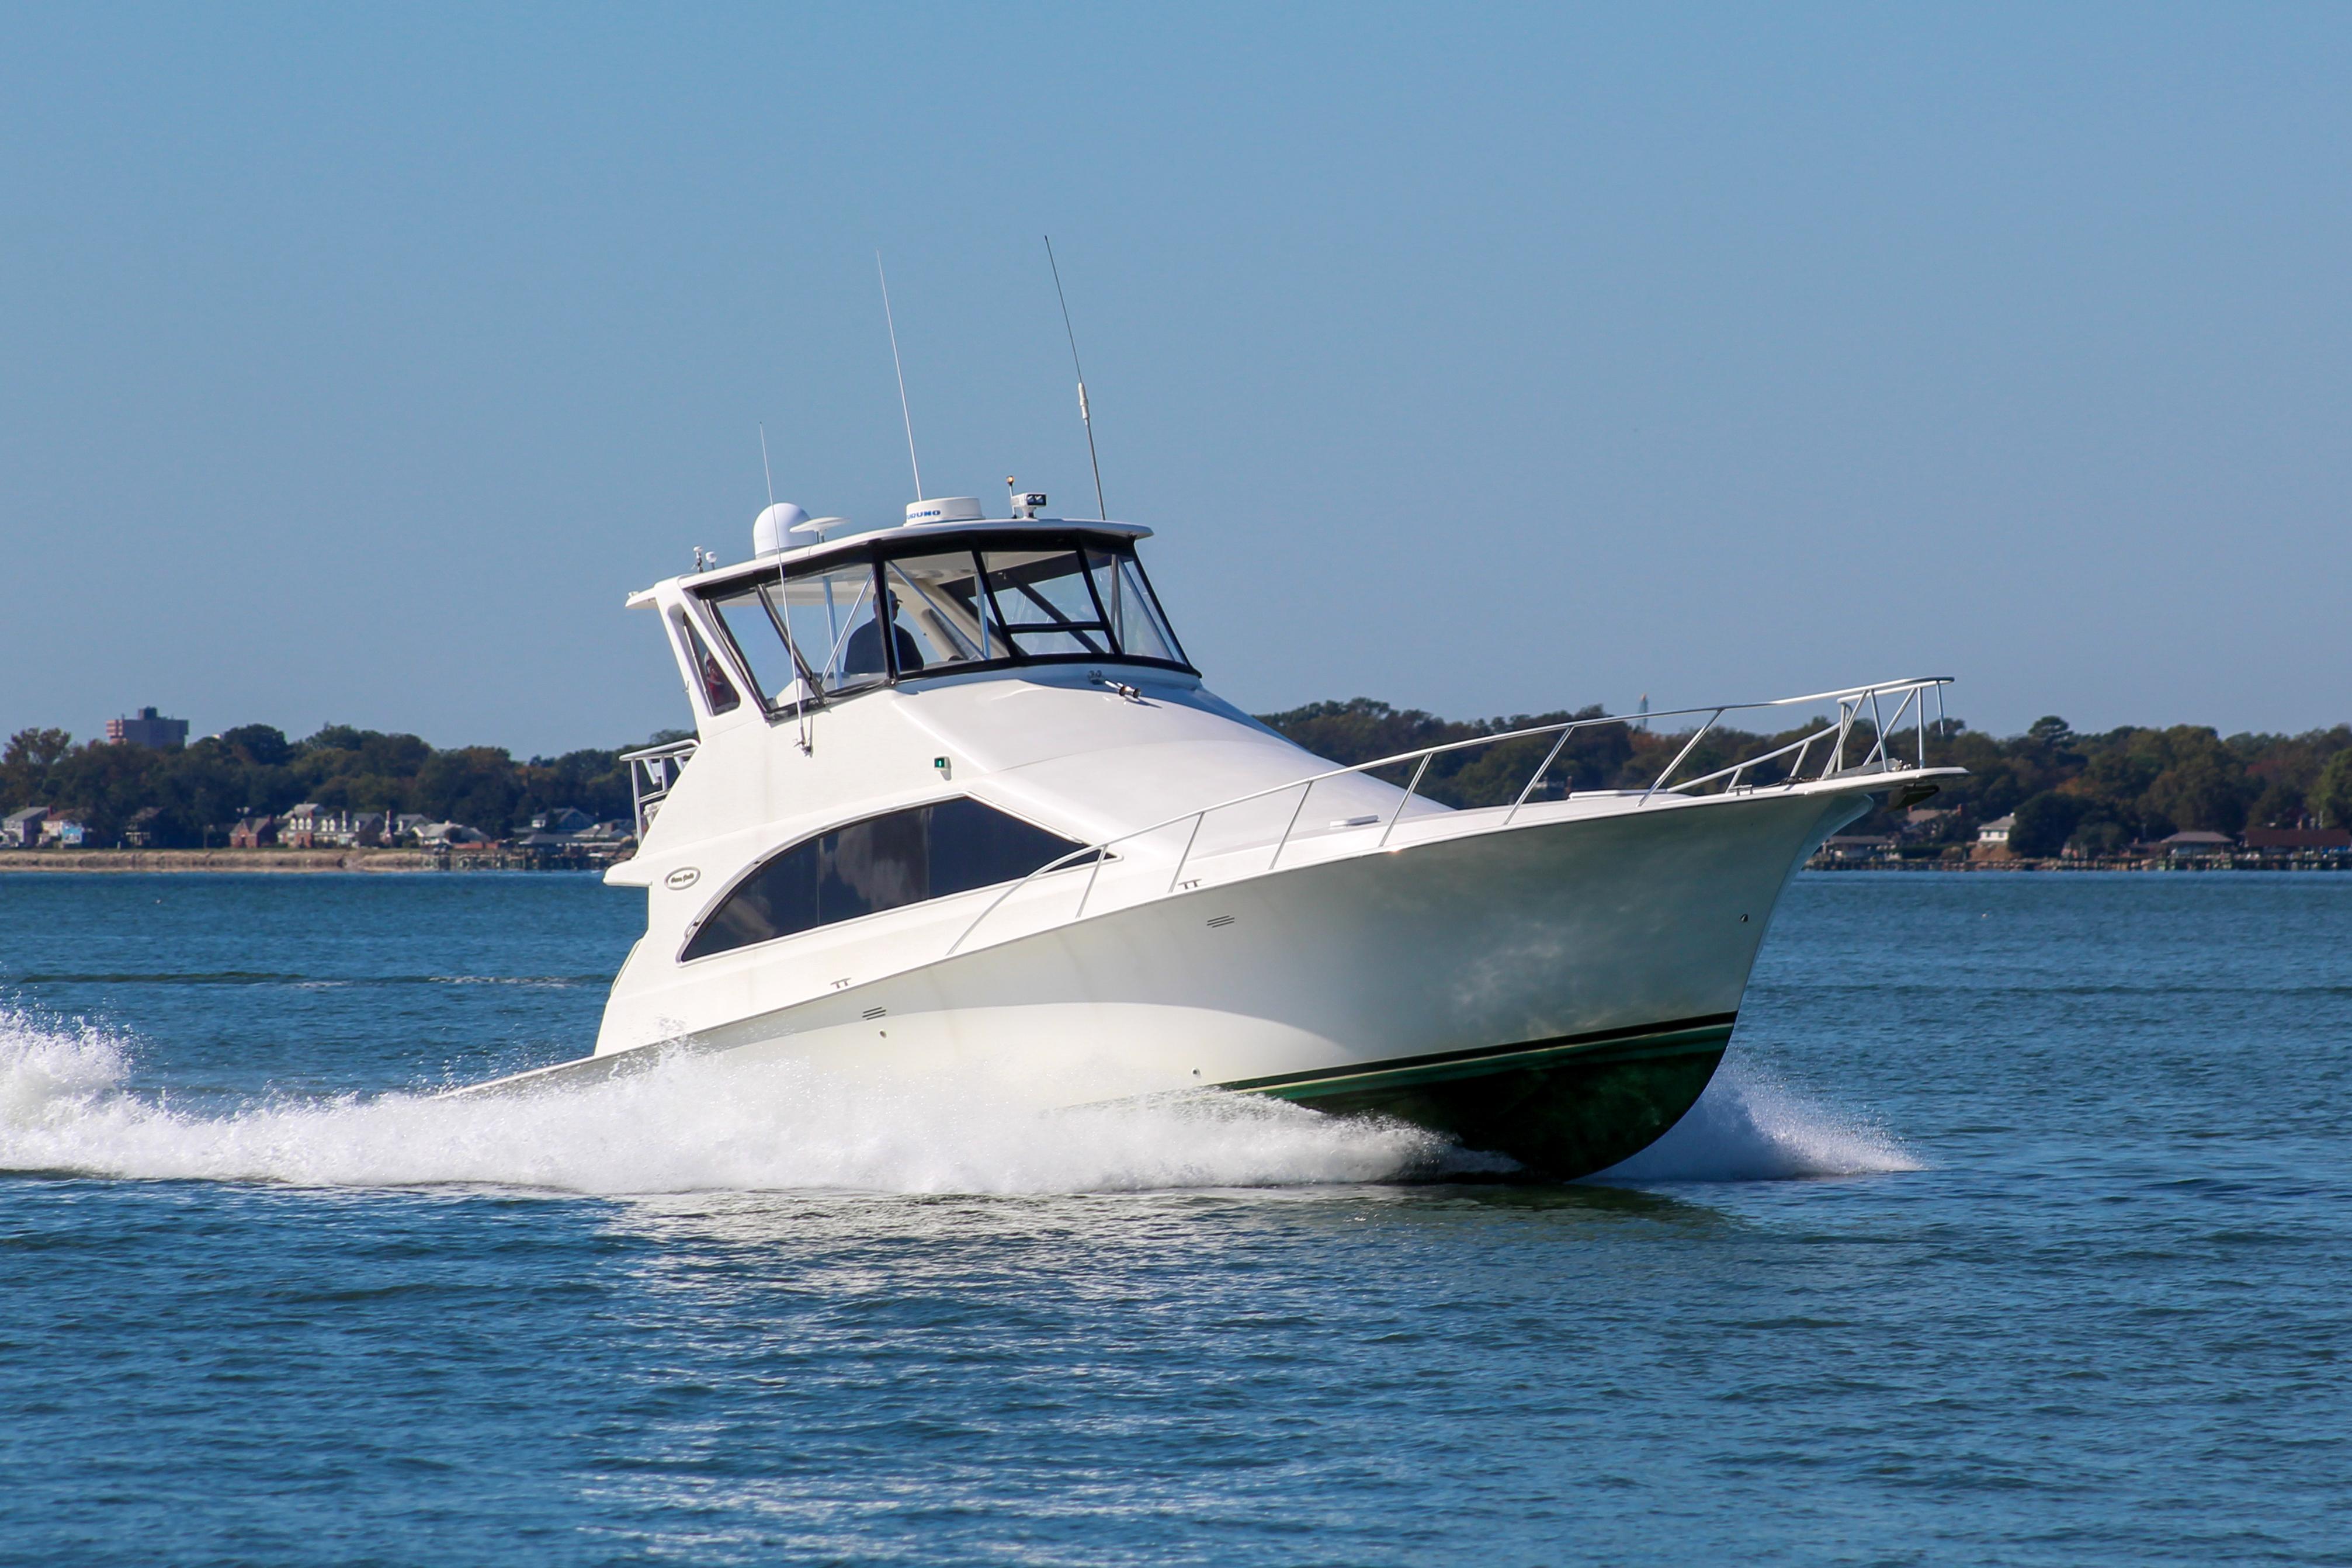 This Tiny Motorboat Is Every Kid's Dream! - Hampton Yachts